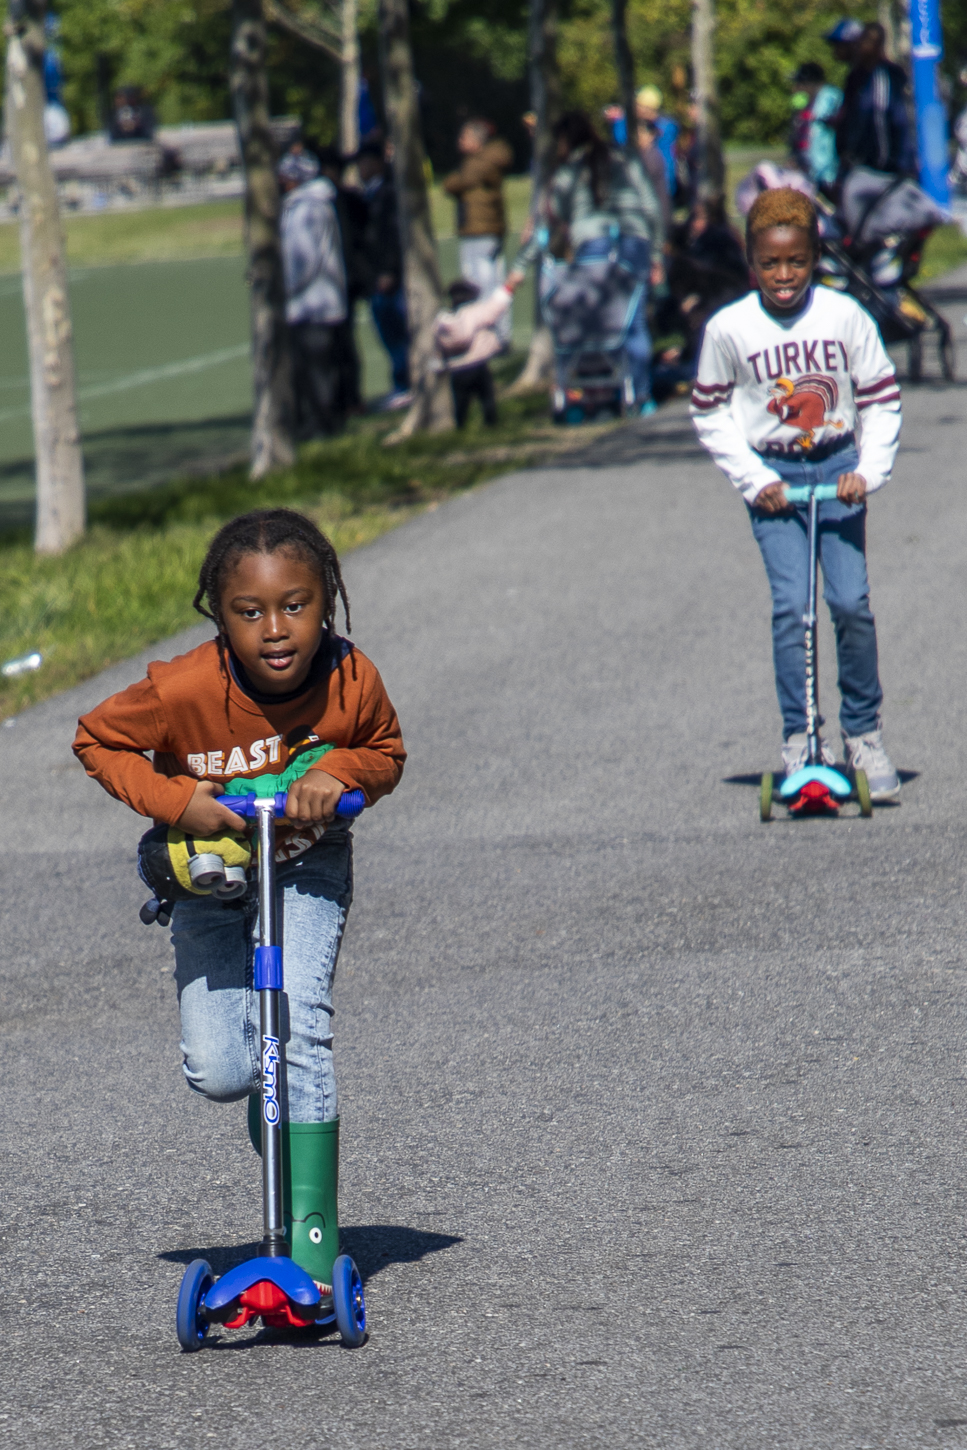 Chauntenay Young’s younger son, to the left, rides a scooter towards the camera as his older brother, to the right, follows along in the background. Her younger son is wearing a graphic orange t-shirt and blue jeans. Her older son is wearing a graphic white t-shirt and blue jeans.